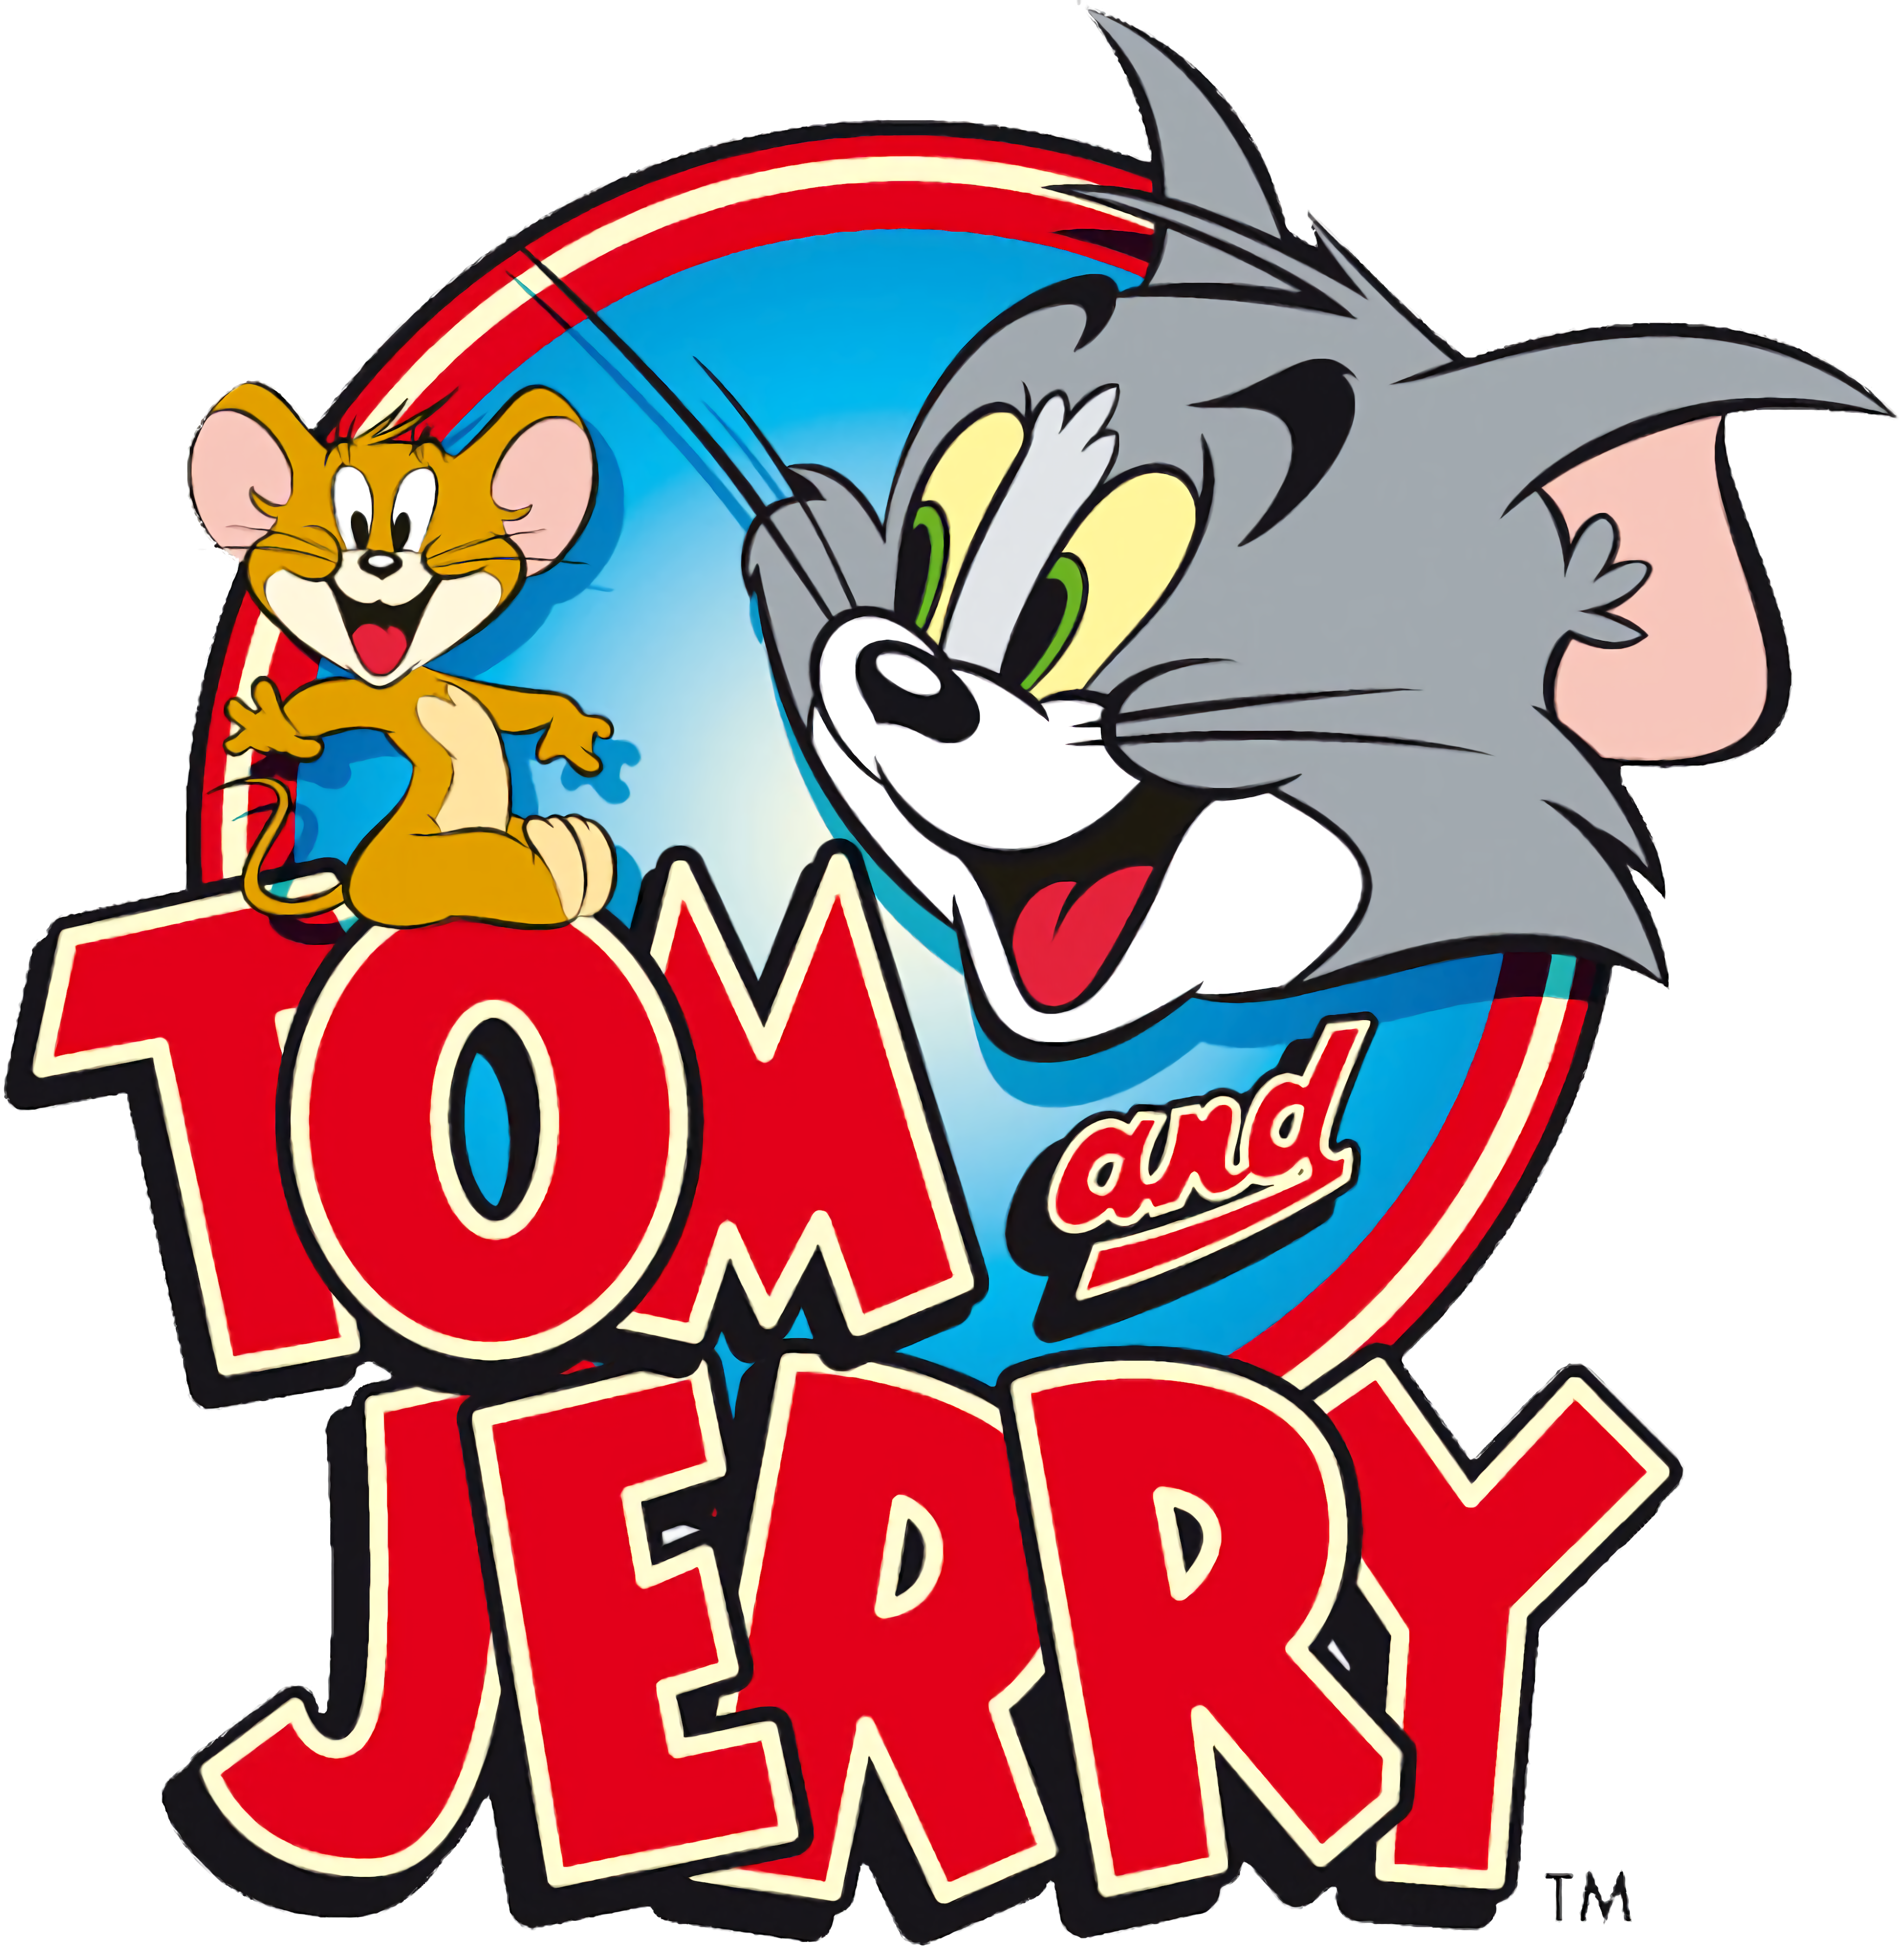 Tom a Jerry hry